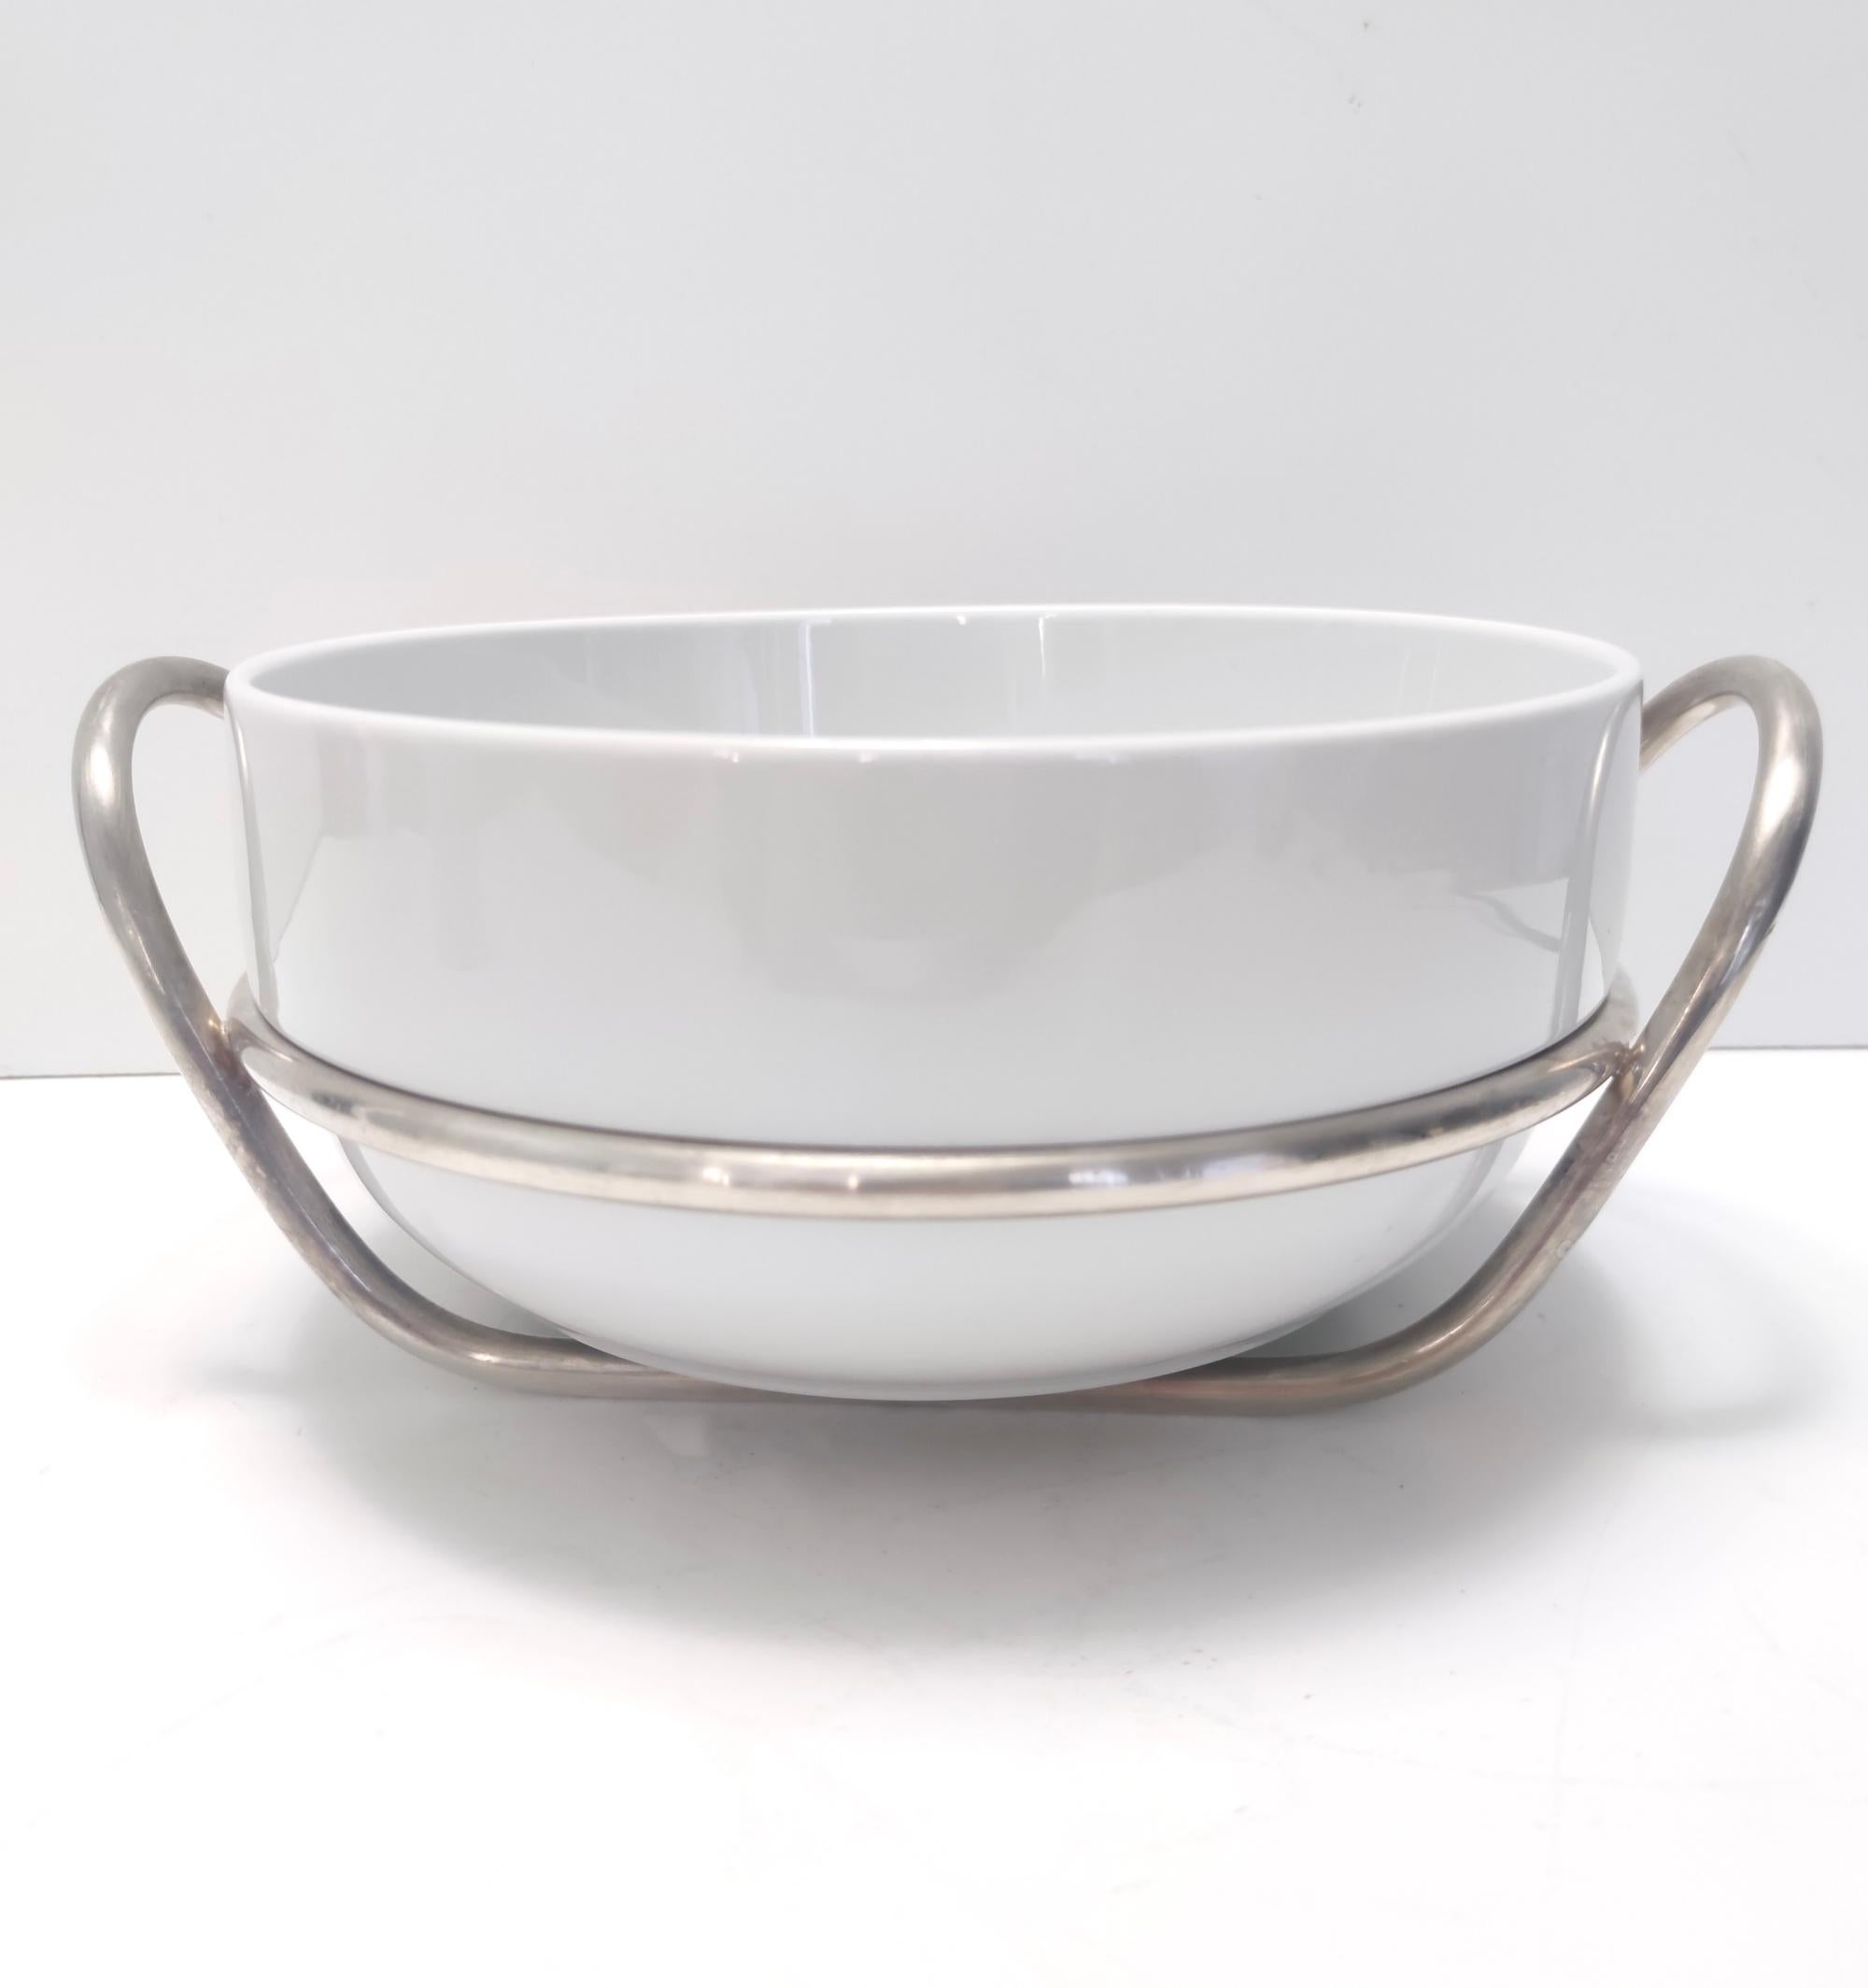 Postmodern Lino Sabattini Silver-Plated and White Ceramic Serving Bowl, Italy In Good Condition For Sale In Bresso, Lombardy